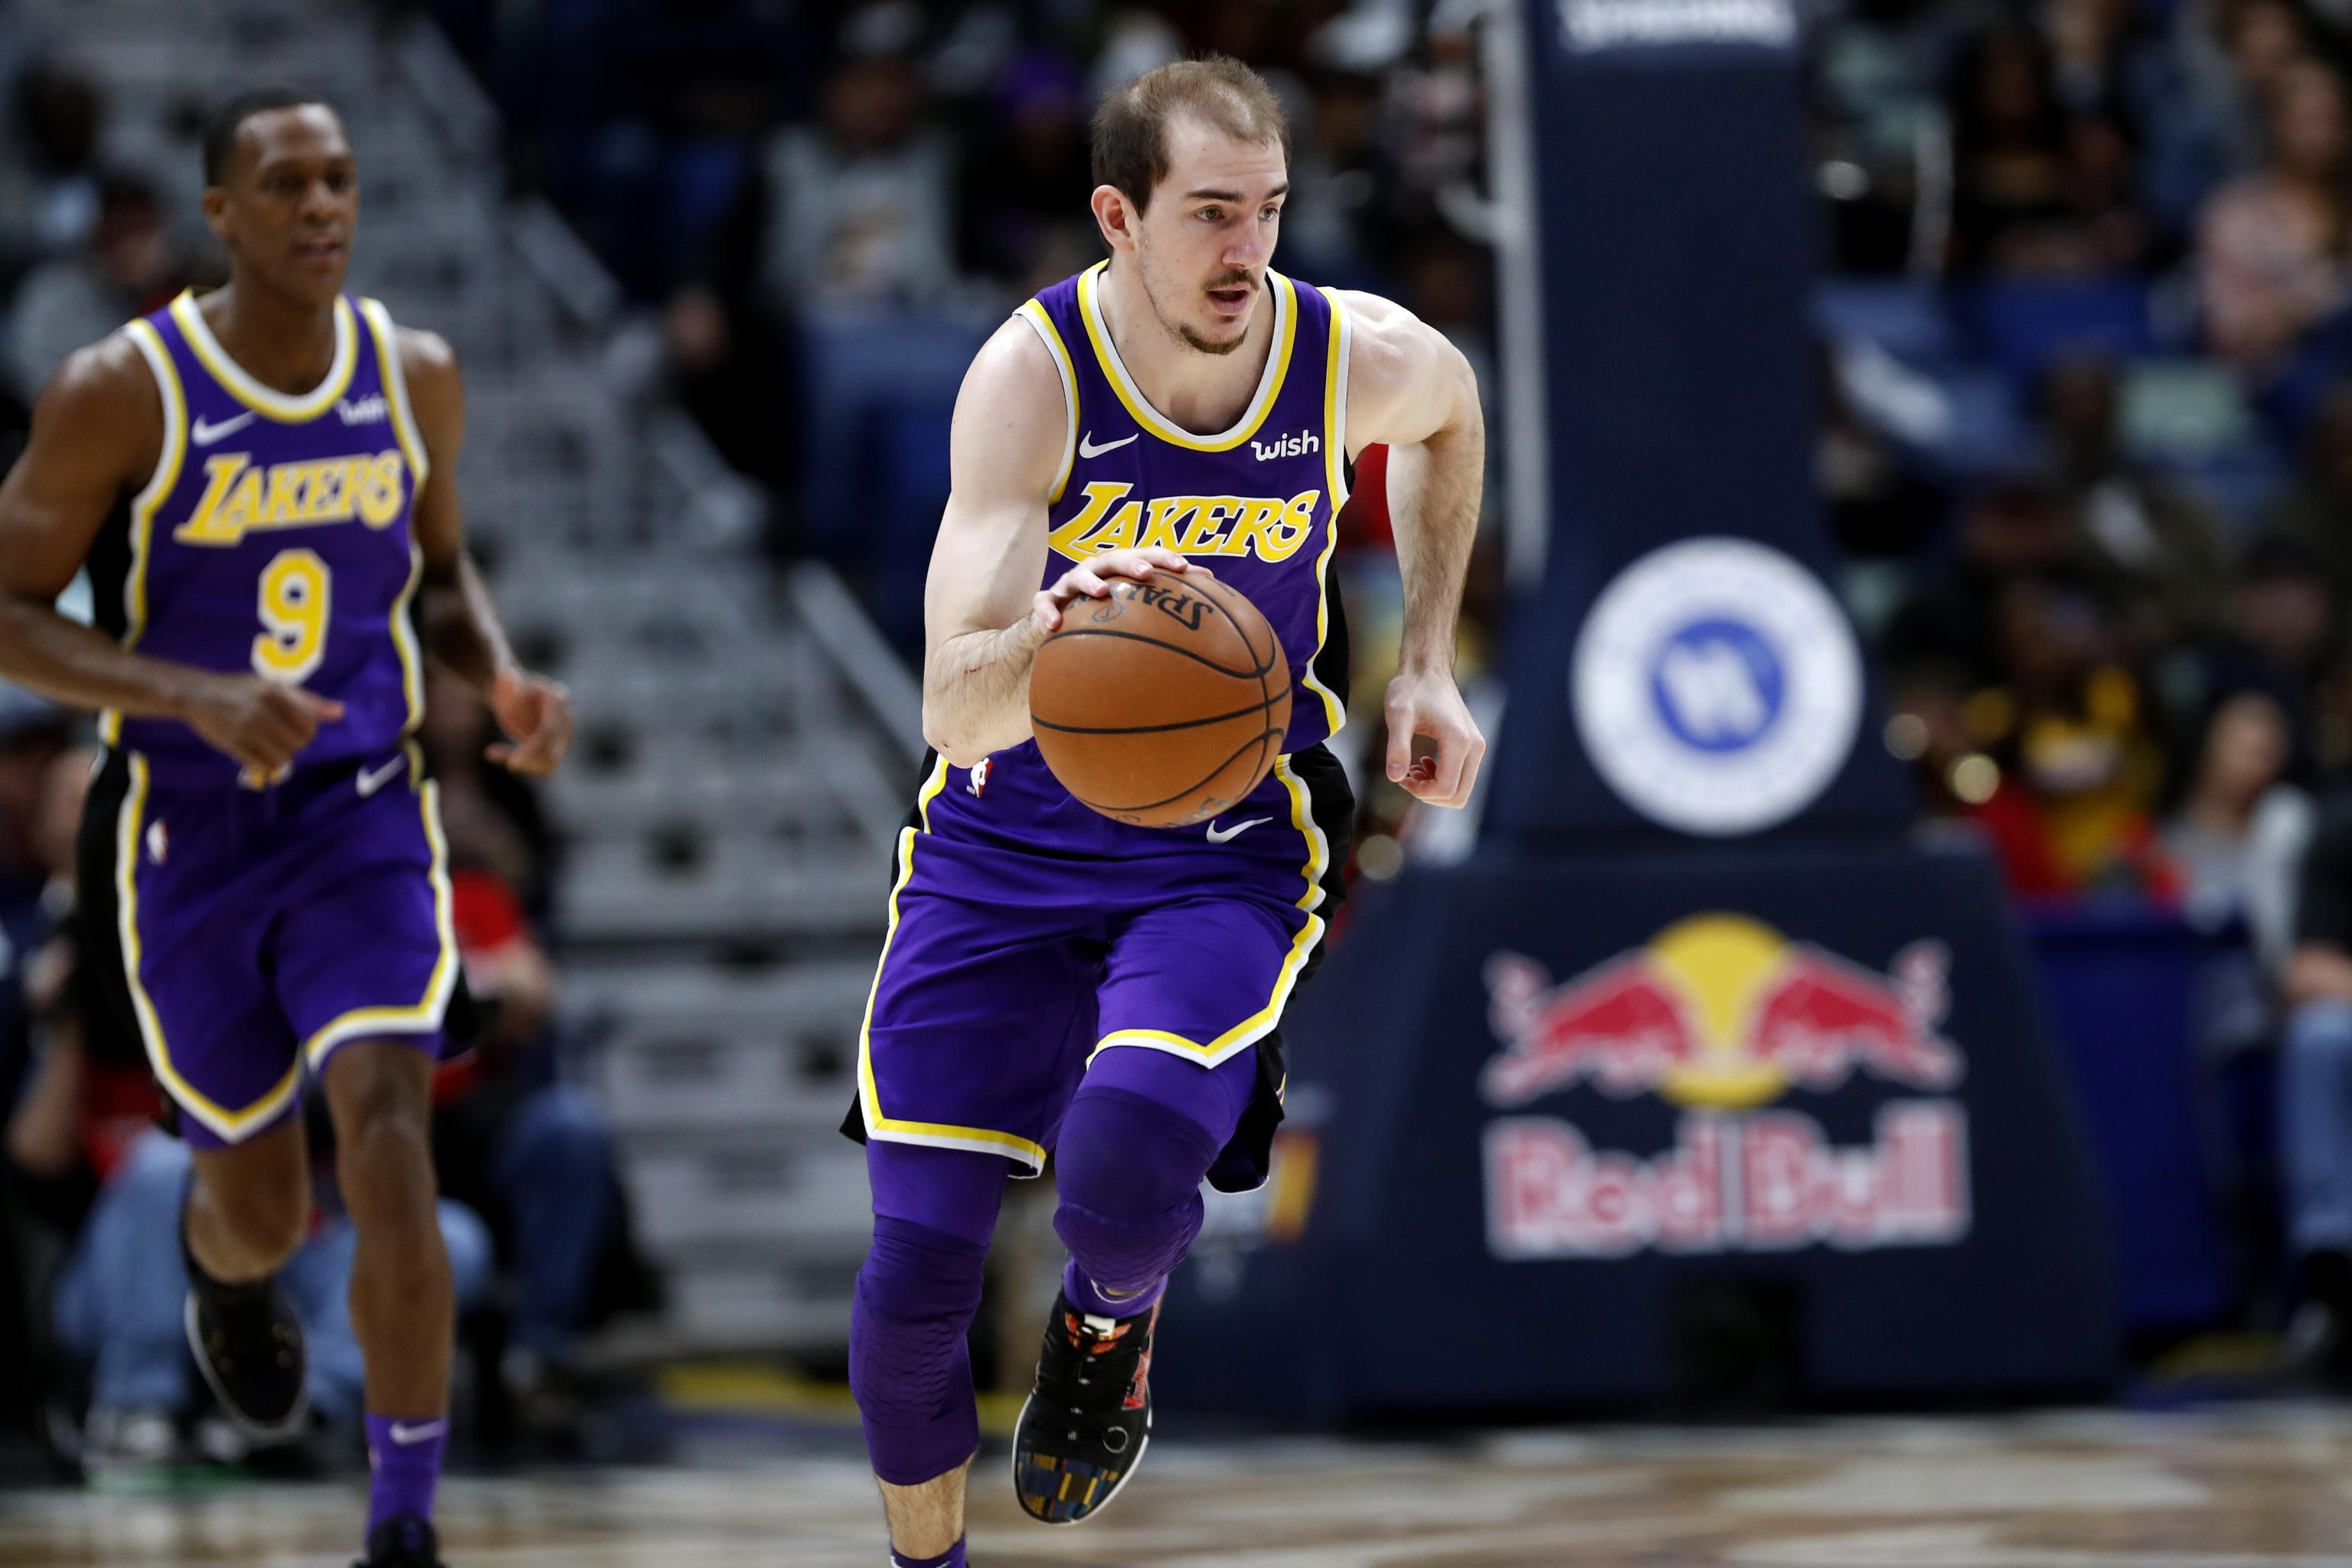 Wild Commercial Starring Lakers' Alex Caruso Goes Viral